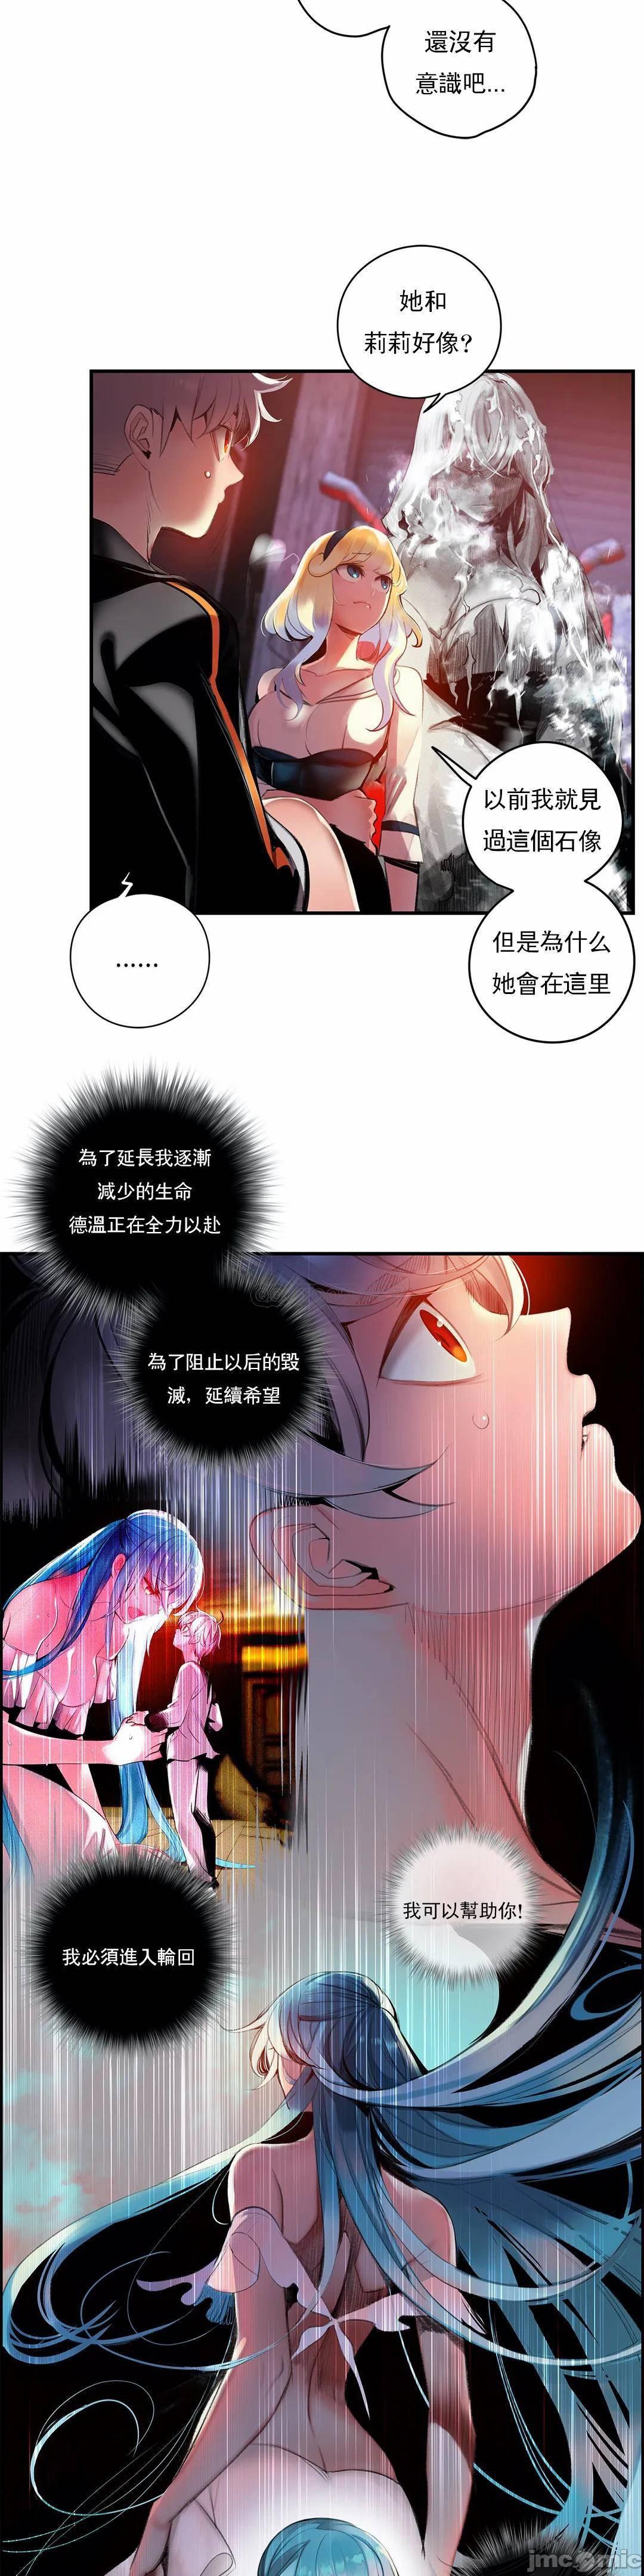 [Juder] Lilith`s Cord (第二季) Ch.77-93 end [Chinese] 394